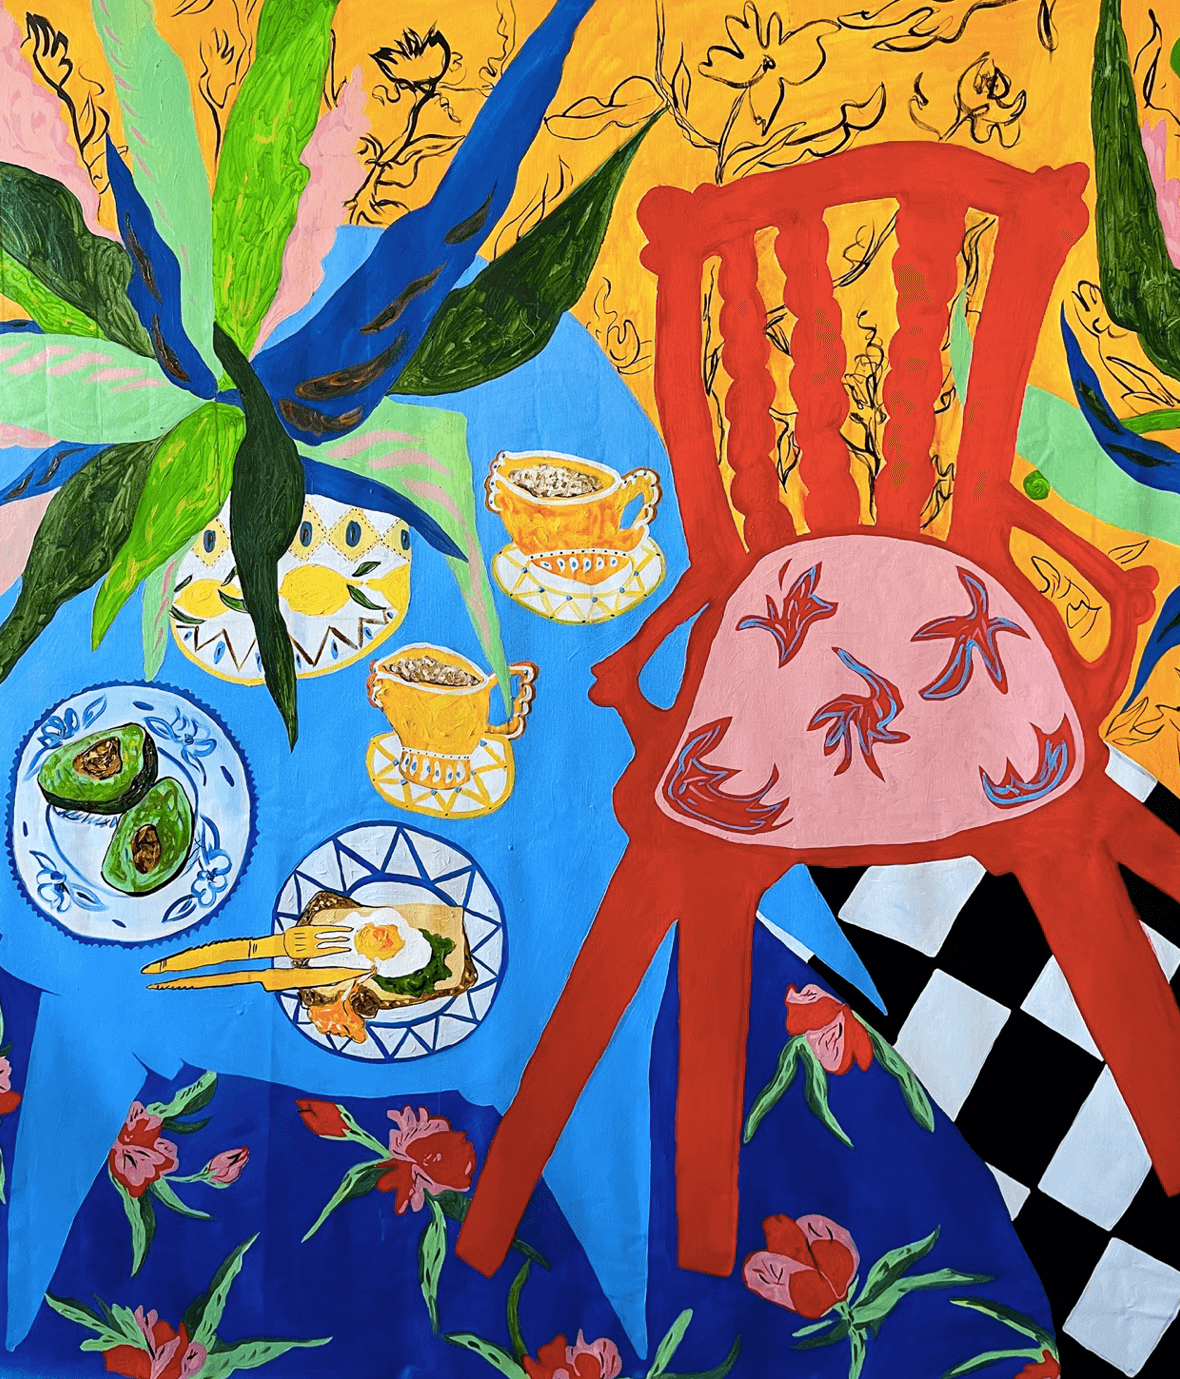 "Cappuccino for two", 155 x140cm, oil on canvas